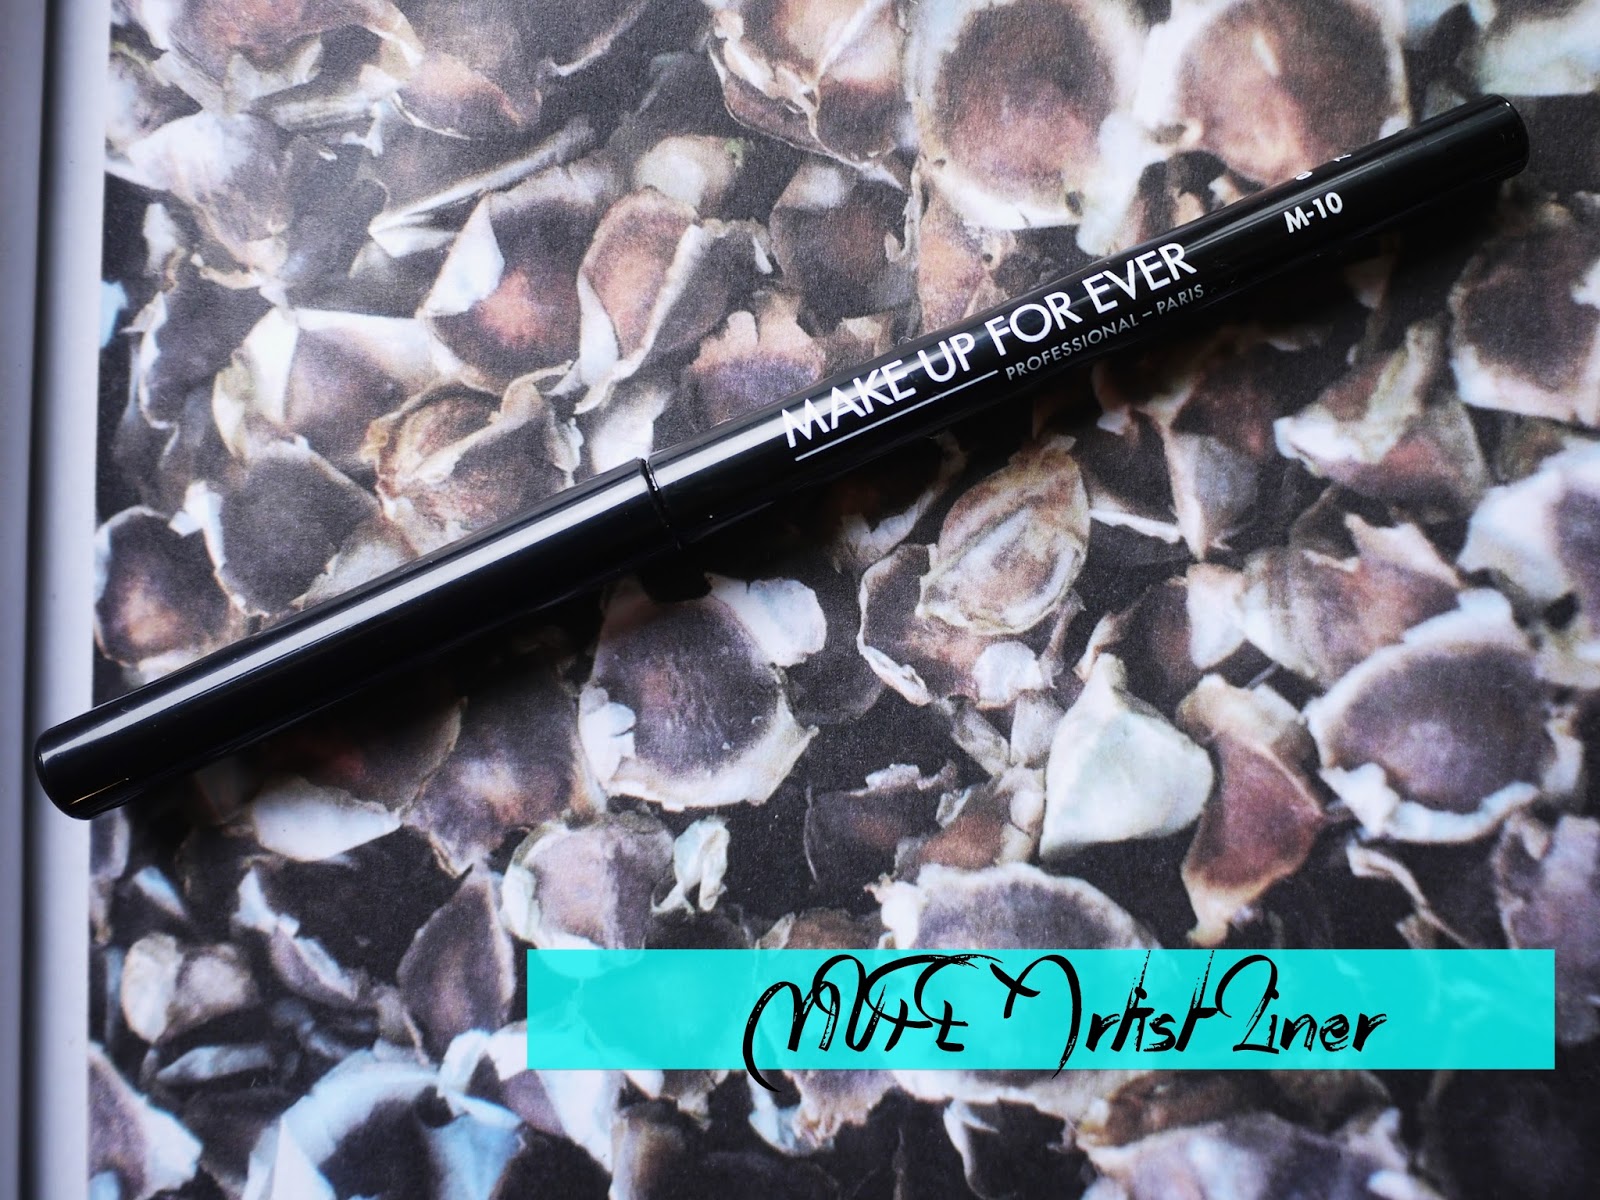 Make Up For Ever Artist Liner M-10 swatch review m10